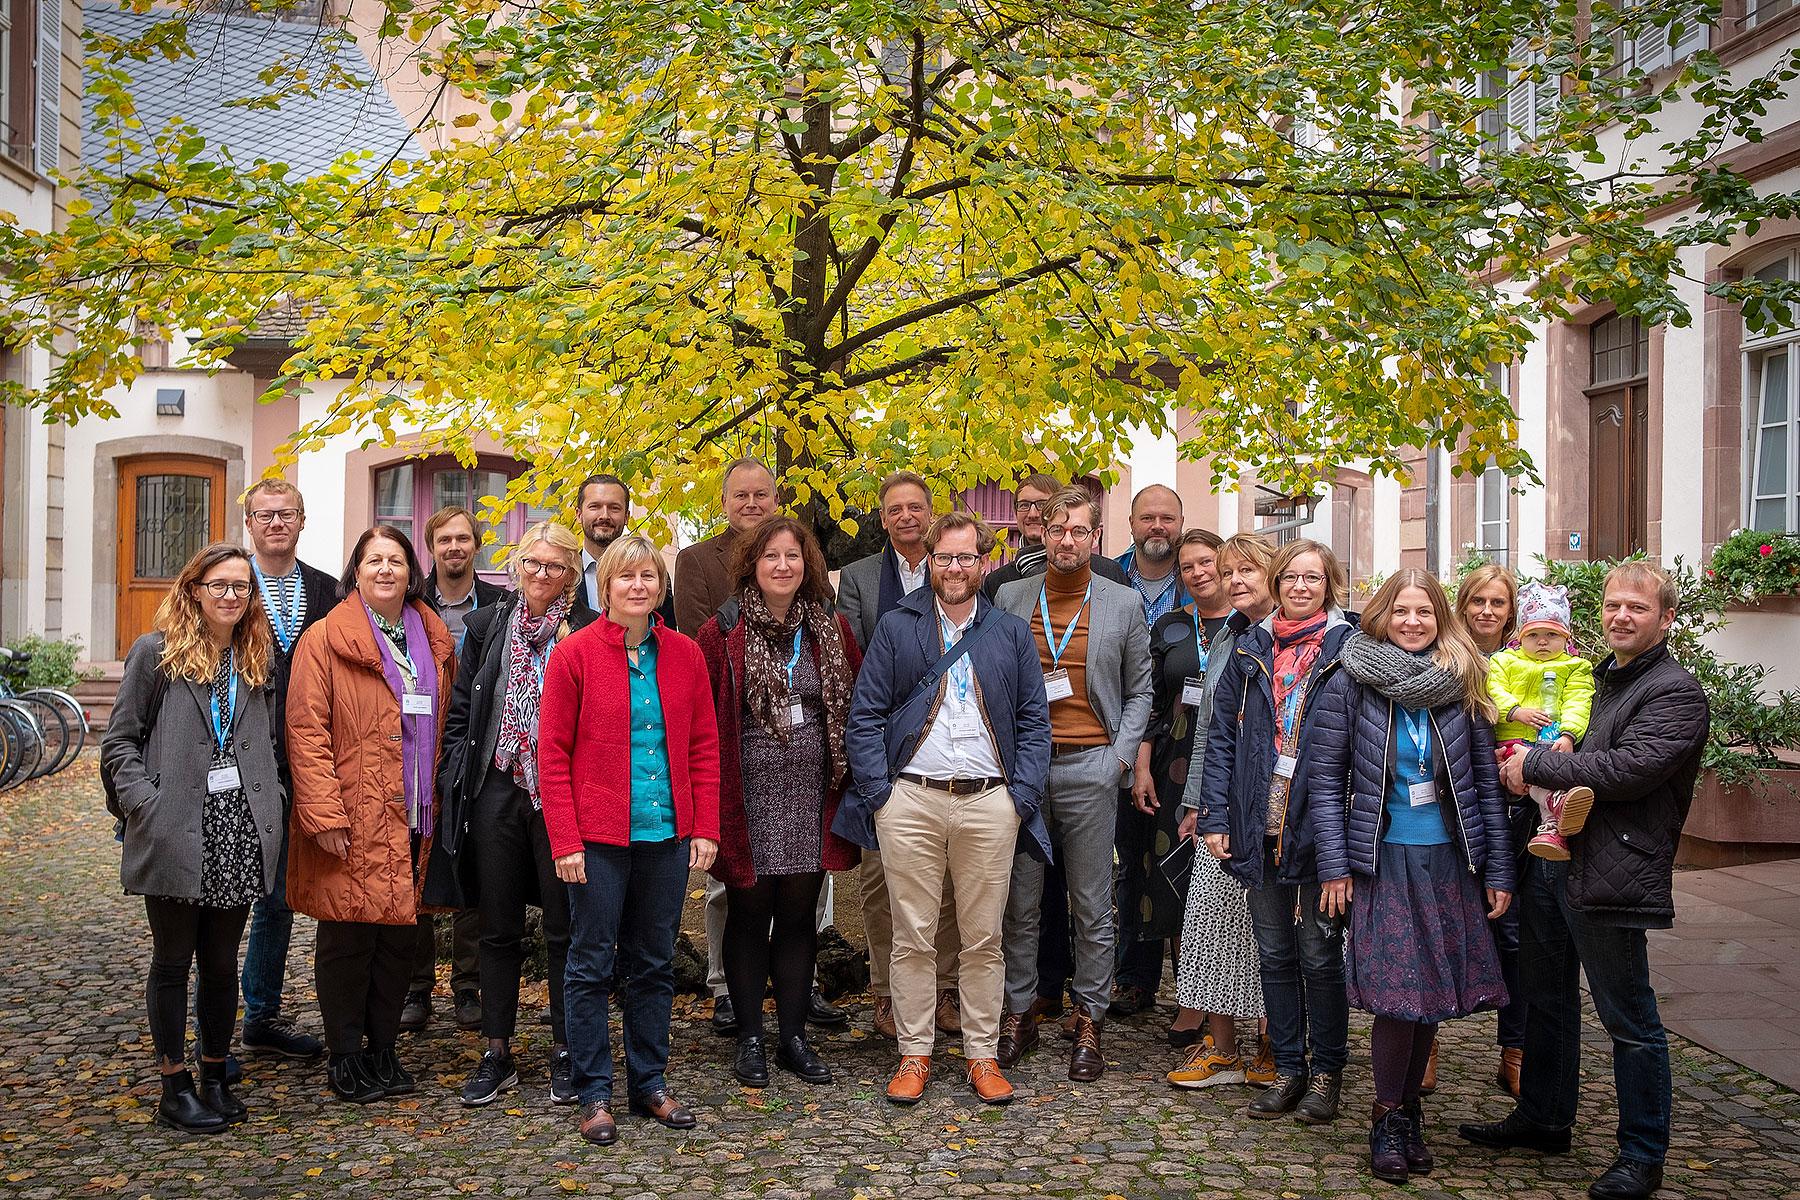 European communicators met in Strasbourg, France, this year for the second time. Photo: LWF/Arni Danielsson